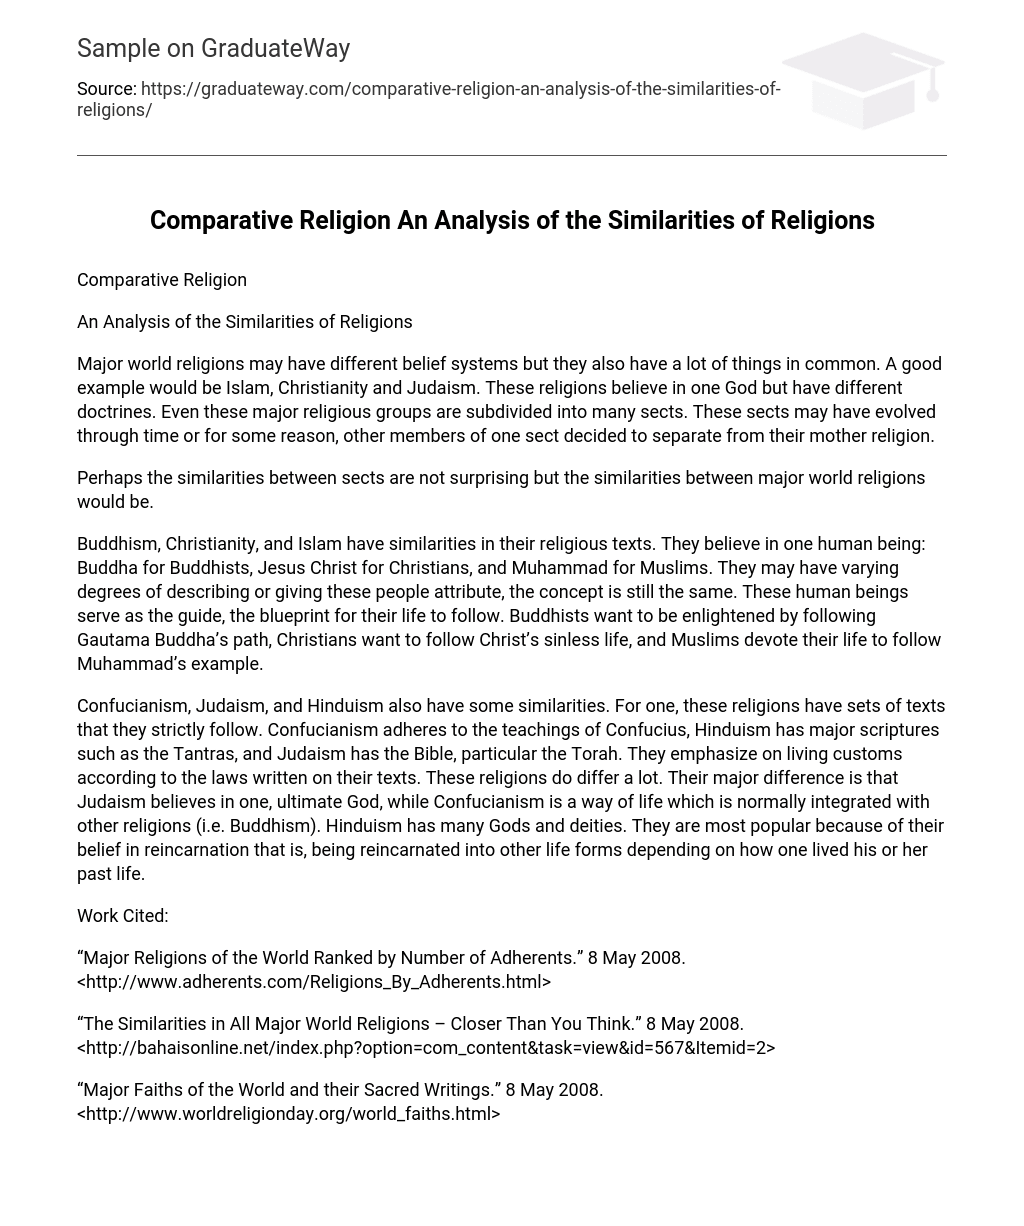 Comparative Religion An Analysis of the Similarities of Religions